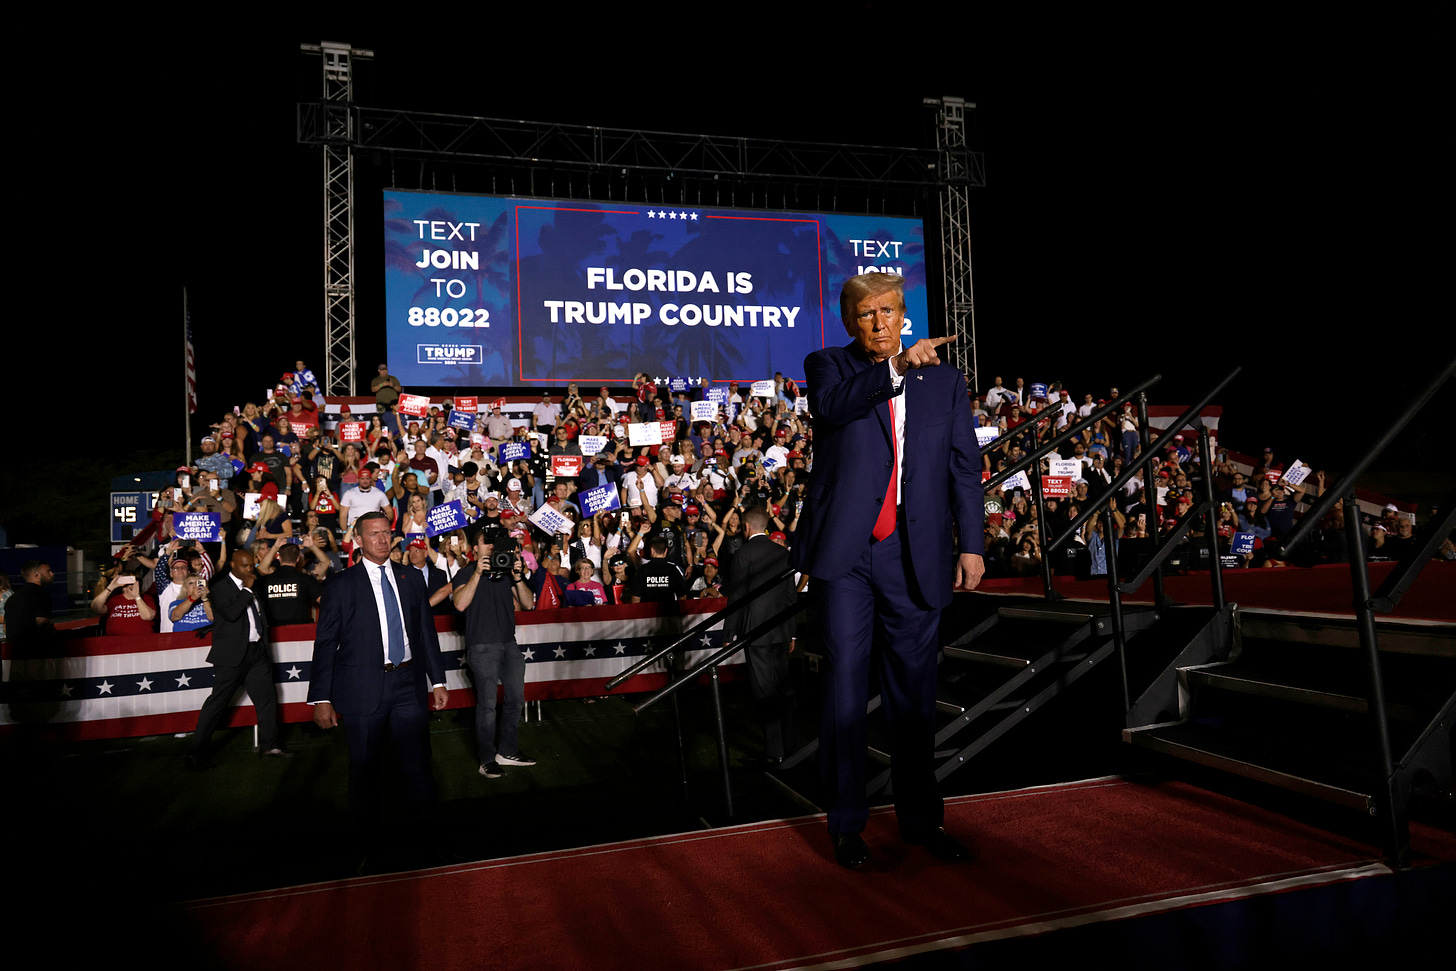 A blonde man in a dark suit stands in front of a screen that reads "Florida is Trump Country"